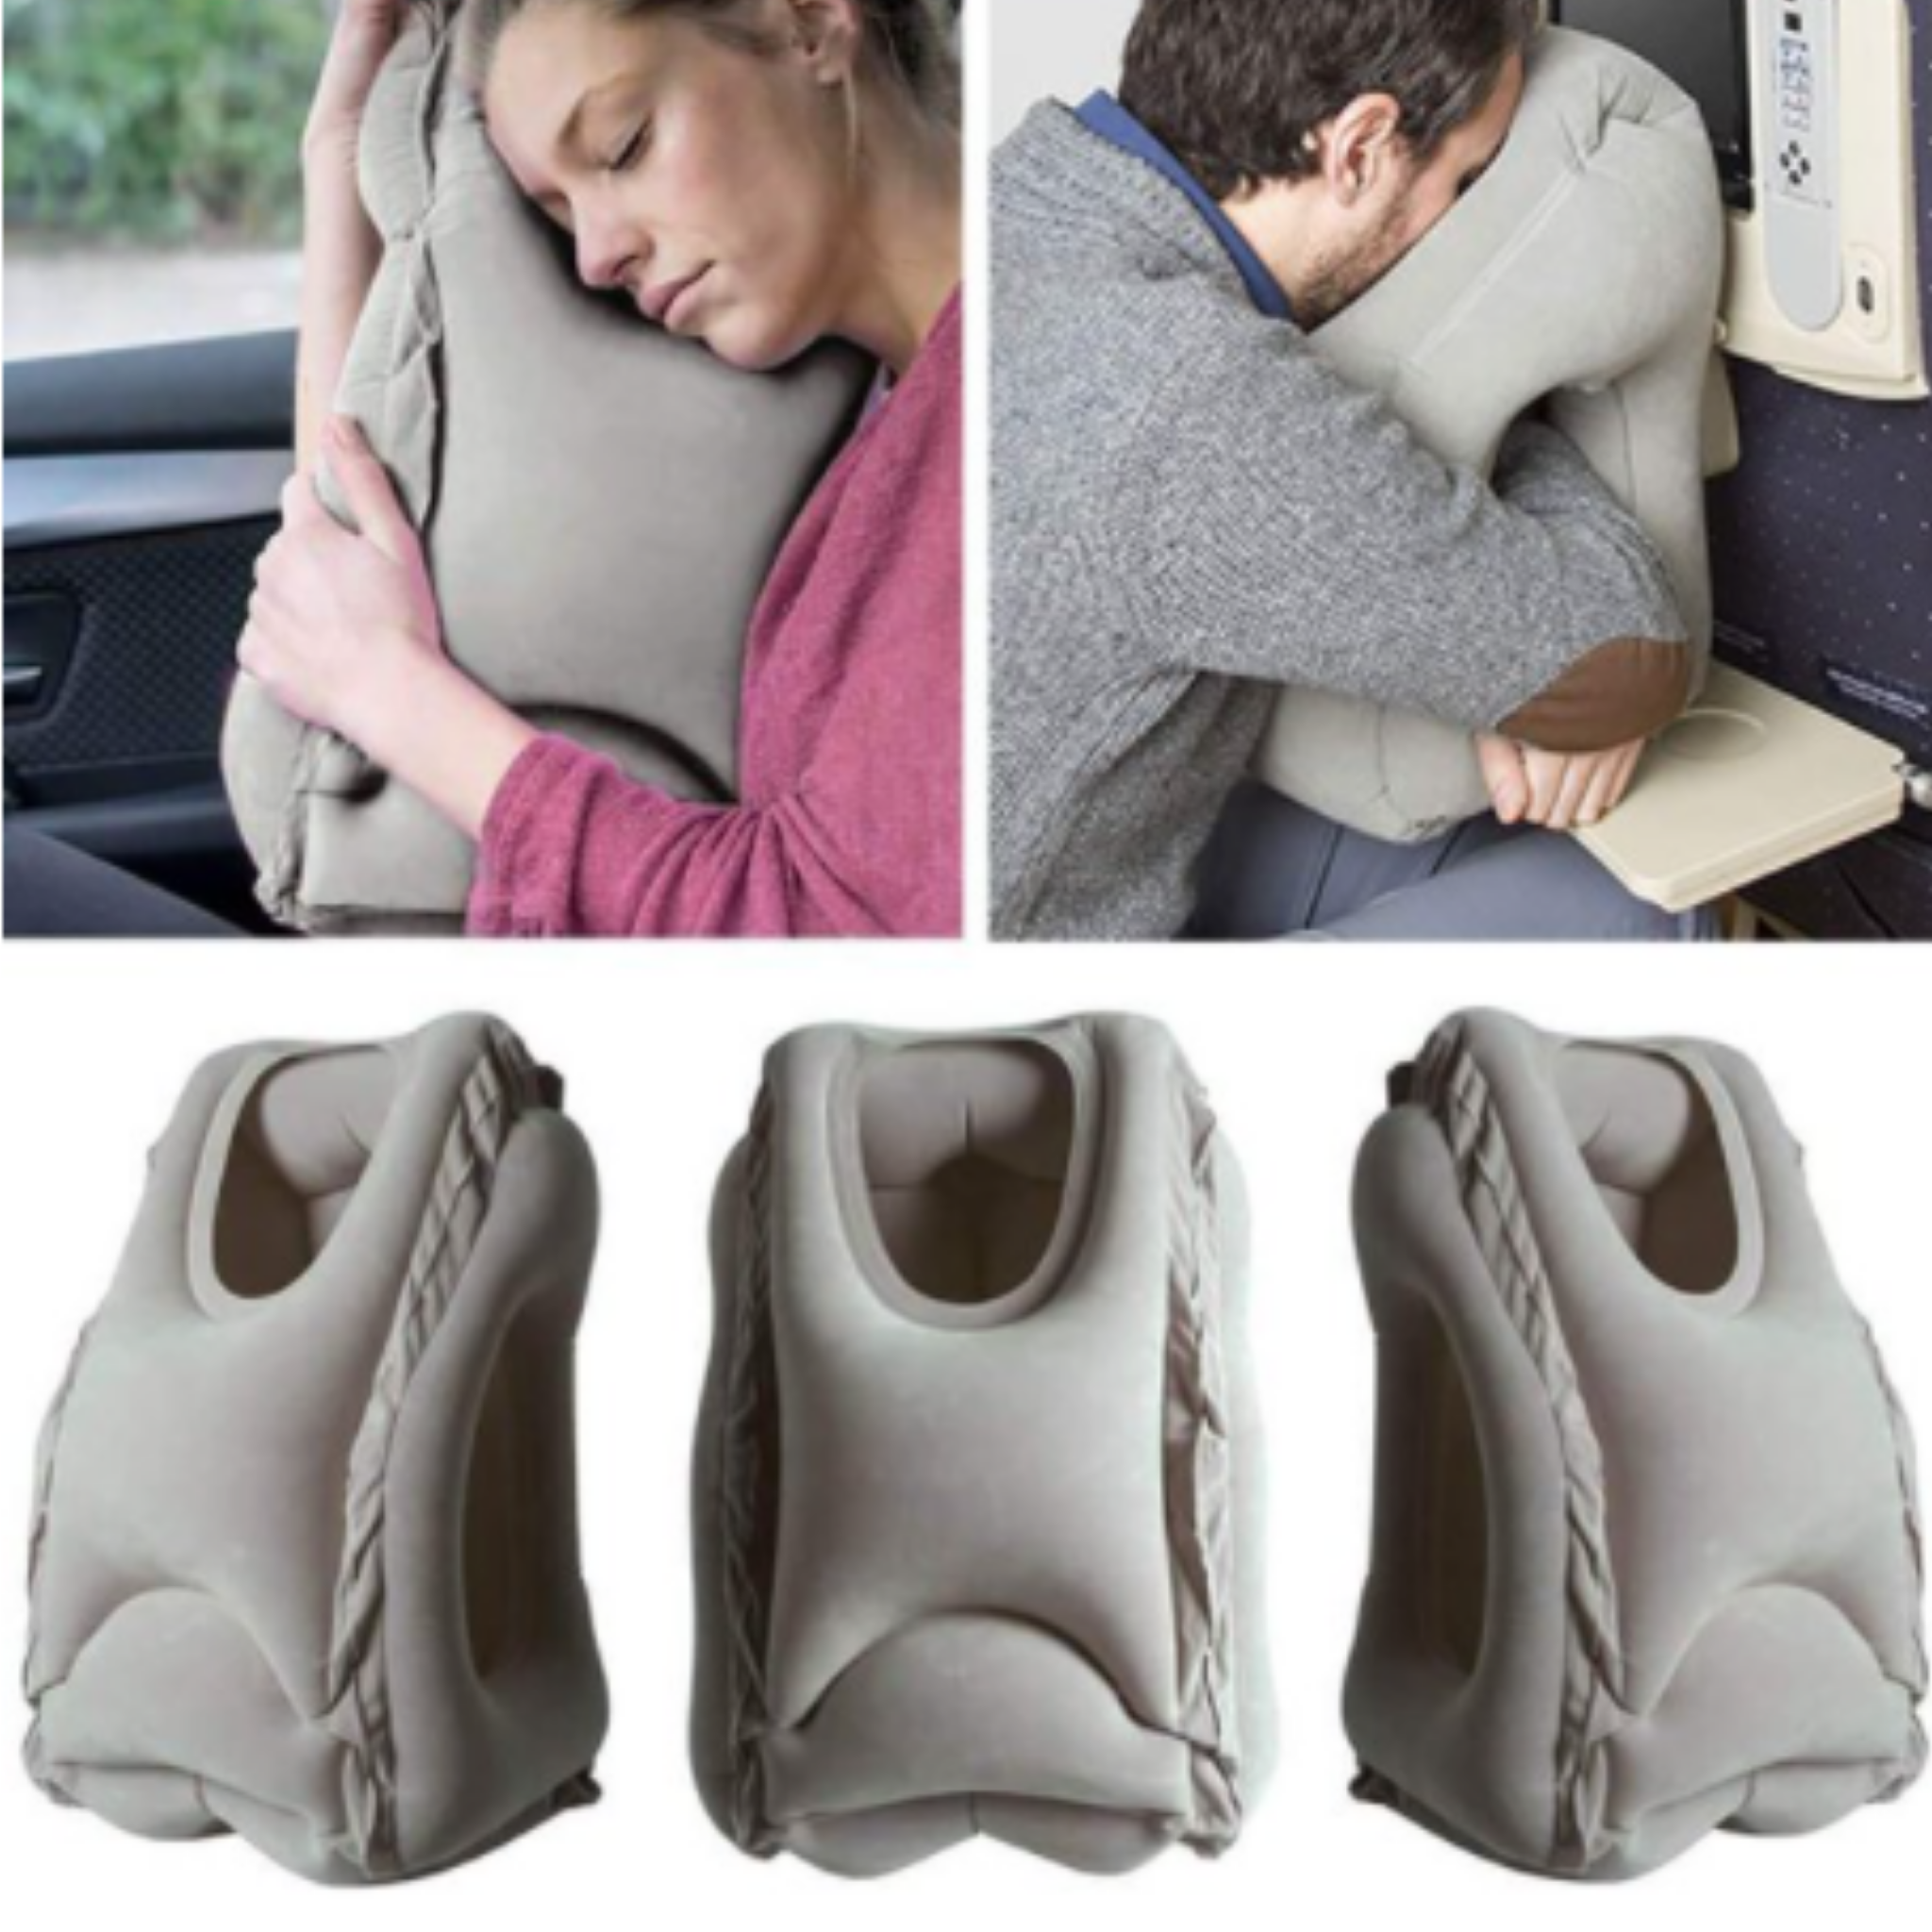 If you are still looking for a perfect travel neck pillow is not found a perfect one, this inflatable travel pillow is perfect you. This airplane neck pillow is not simple for your neck, its for maintaining a balance between head, neck and shoulders.  DISREGARD KEYWORDS: travel neck pillow, inflatable travel pillow, airplane neck pillow, neck pillow, inflatable neck pillow, plane pillows, neck rest, neck pillow for plane, pillows to help with neck pain.